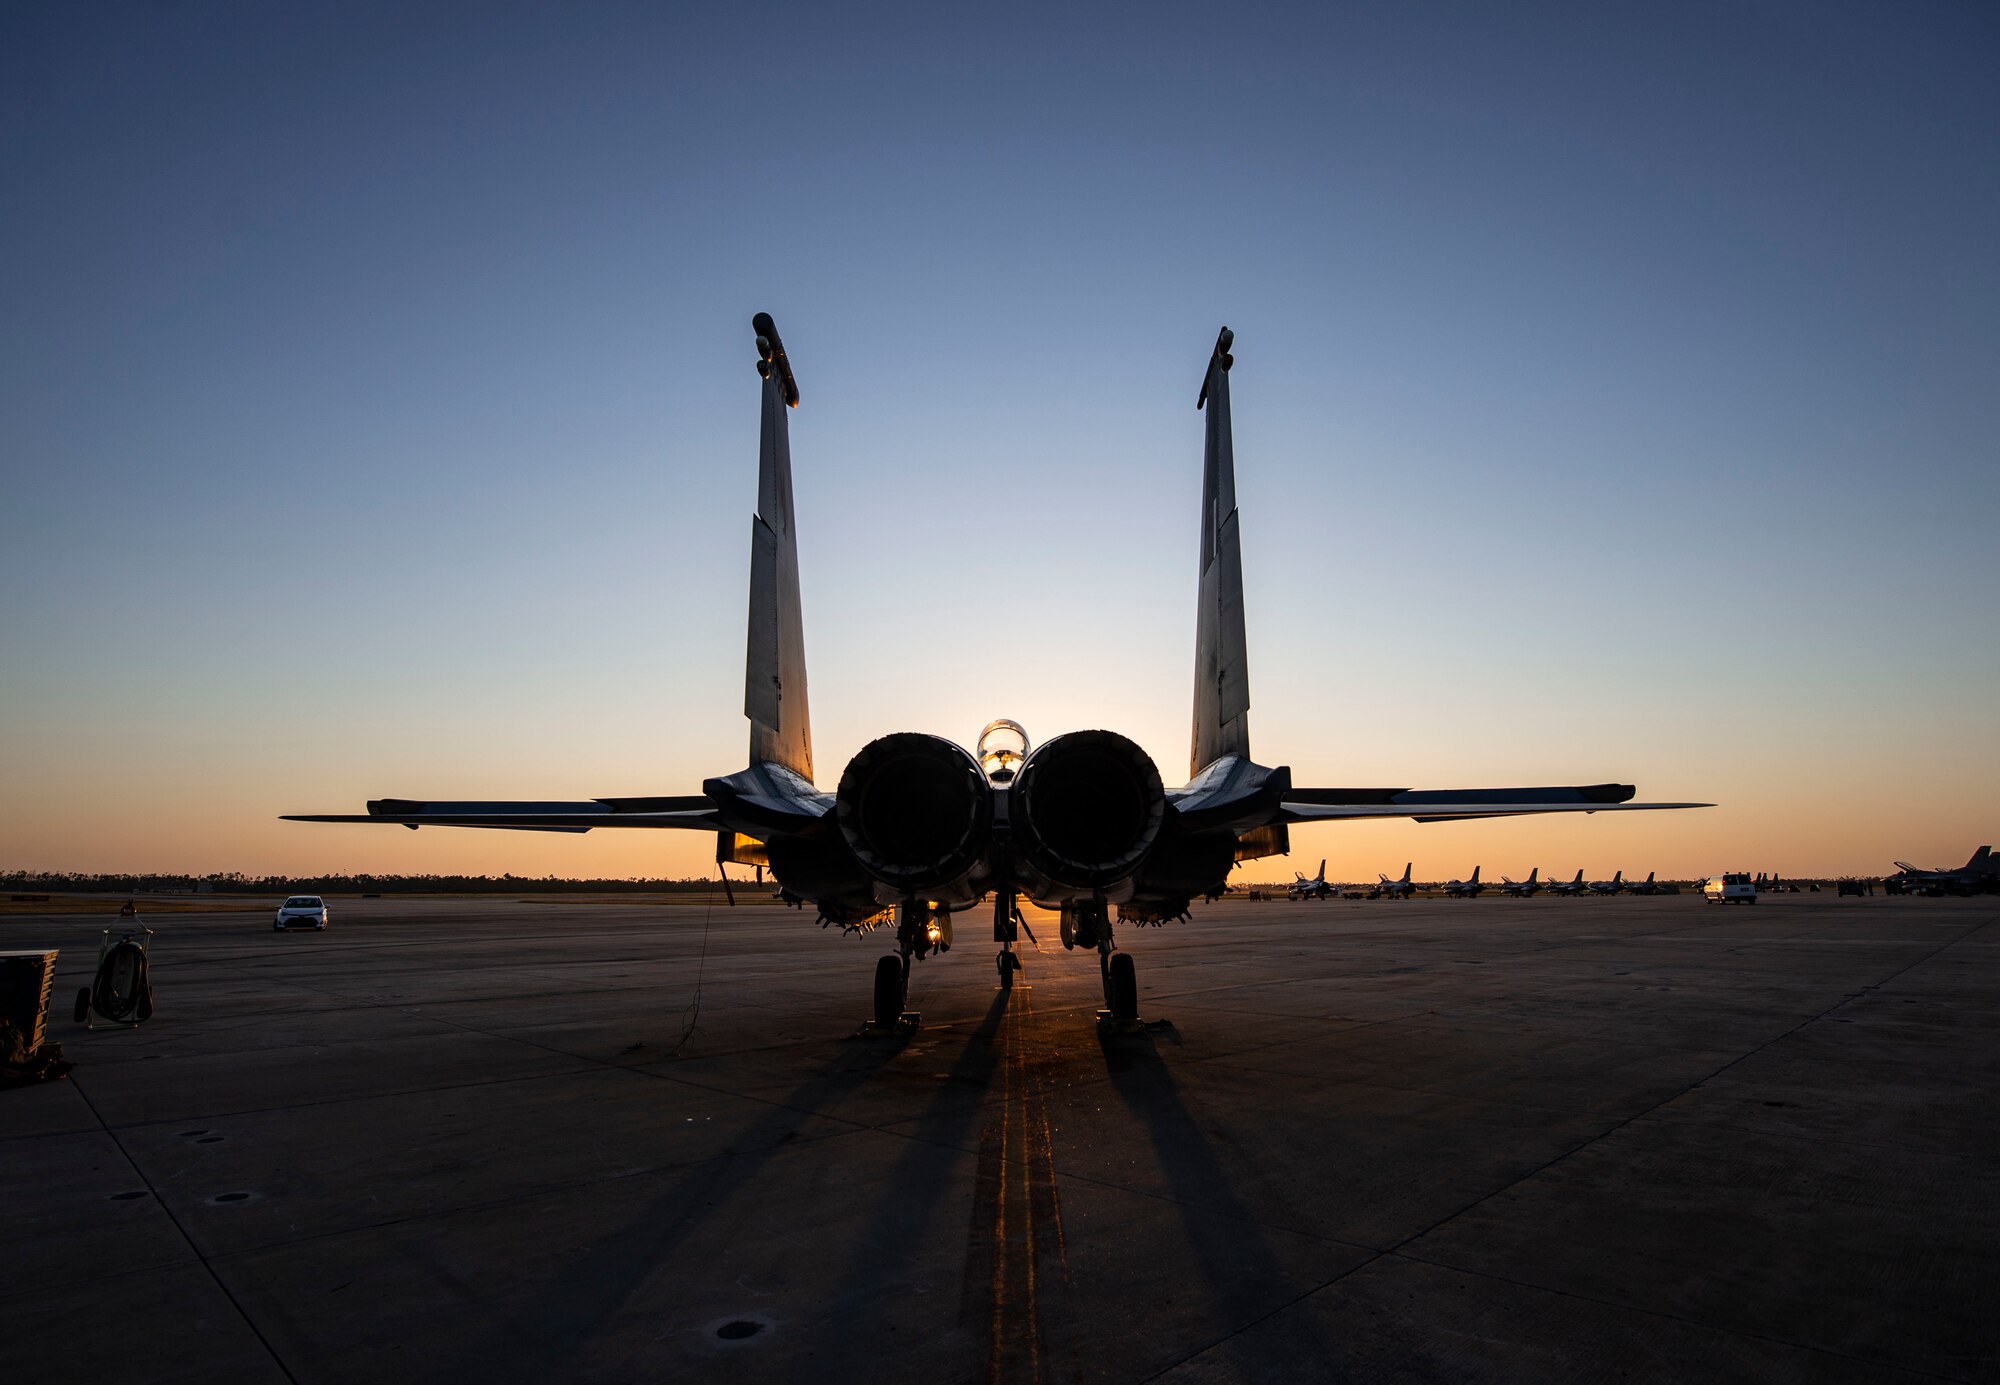 An F-15E Strike Eagle fighter jet assigned to the 422nd Test and Evaluation Squadron, Nellis Air Force Base, Nev., remains parked on the flightline during Combat Archer 19-12 on Tyndall AFB, Fla., Sept. 24, 2019. Combat Archer is the Department of Defense’s largest air-to-air live fire missile employment exercise. (U.S. Air Force photo by Airman 1st Class Bailee A. Darbasie)